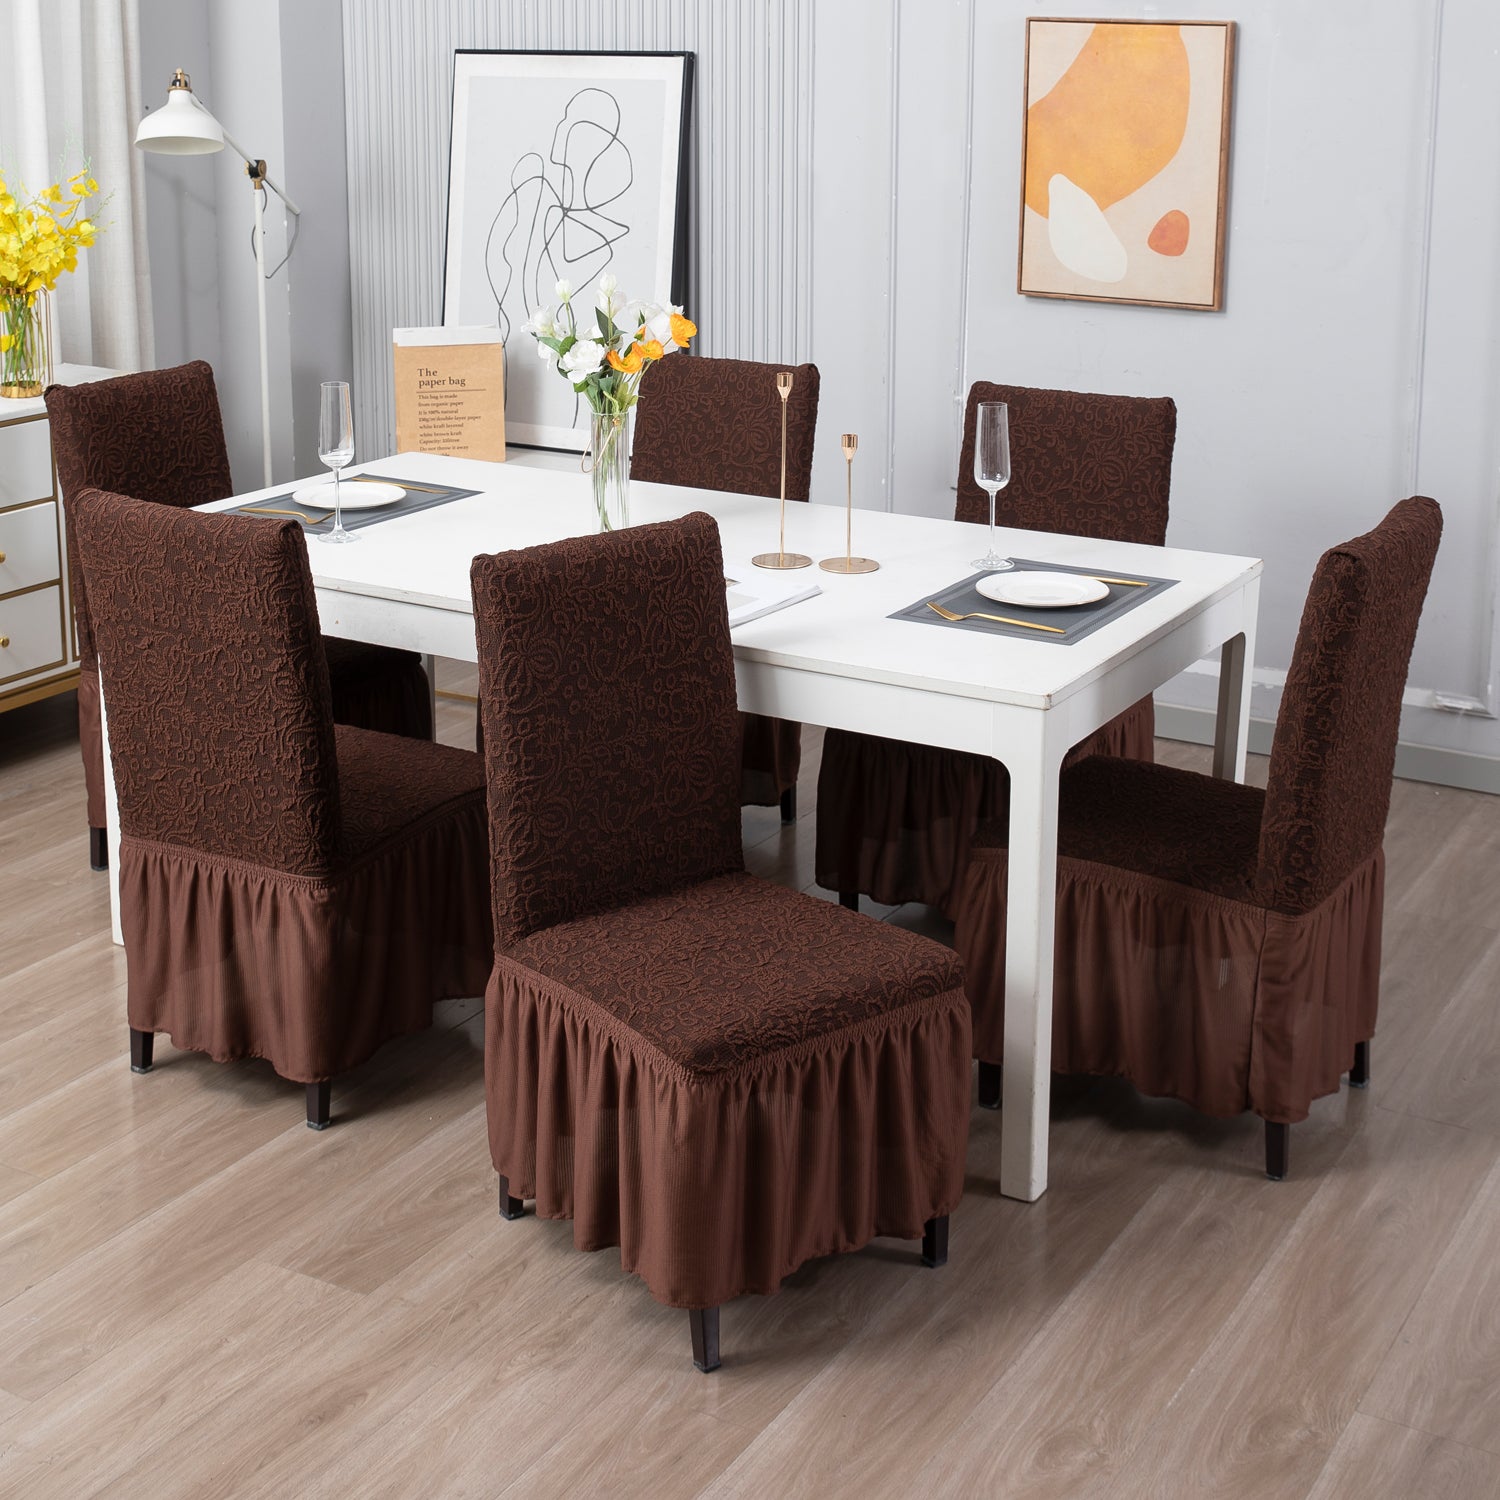 Elastic Stretchable Designer Woven Jacquard Dining Chair Cover with Frill, Pecan Brown